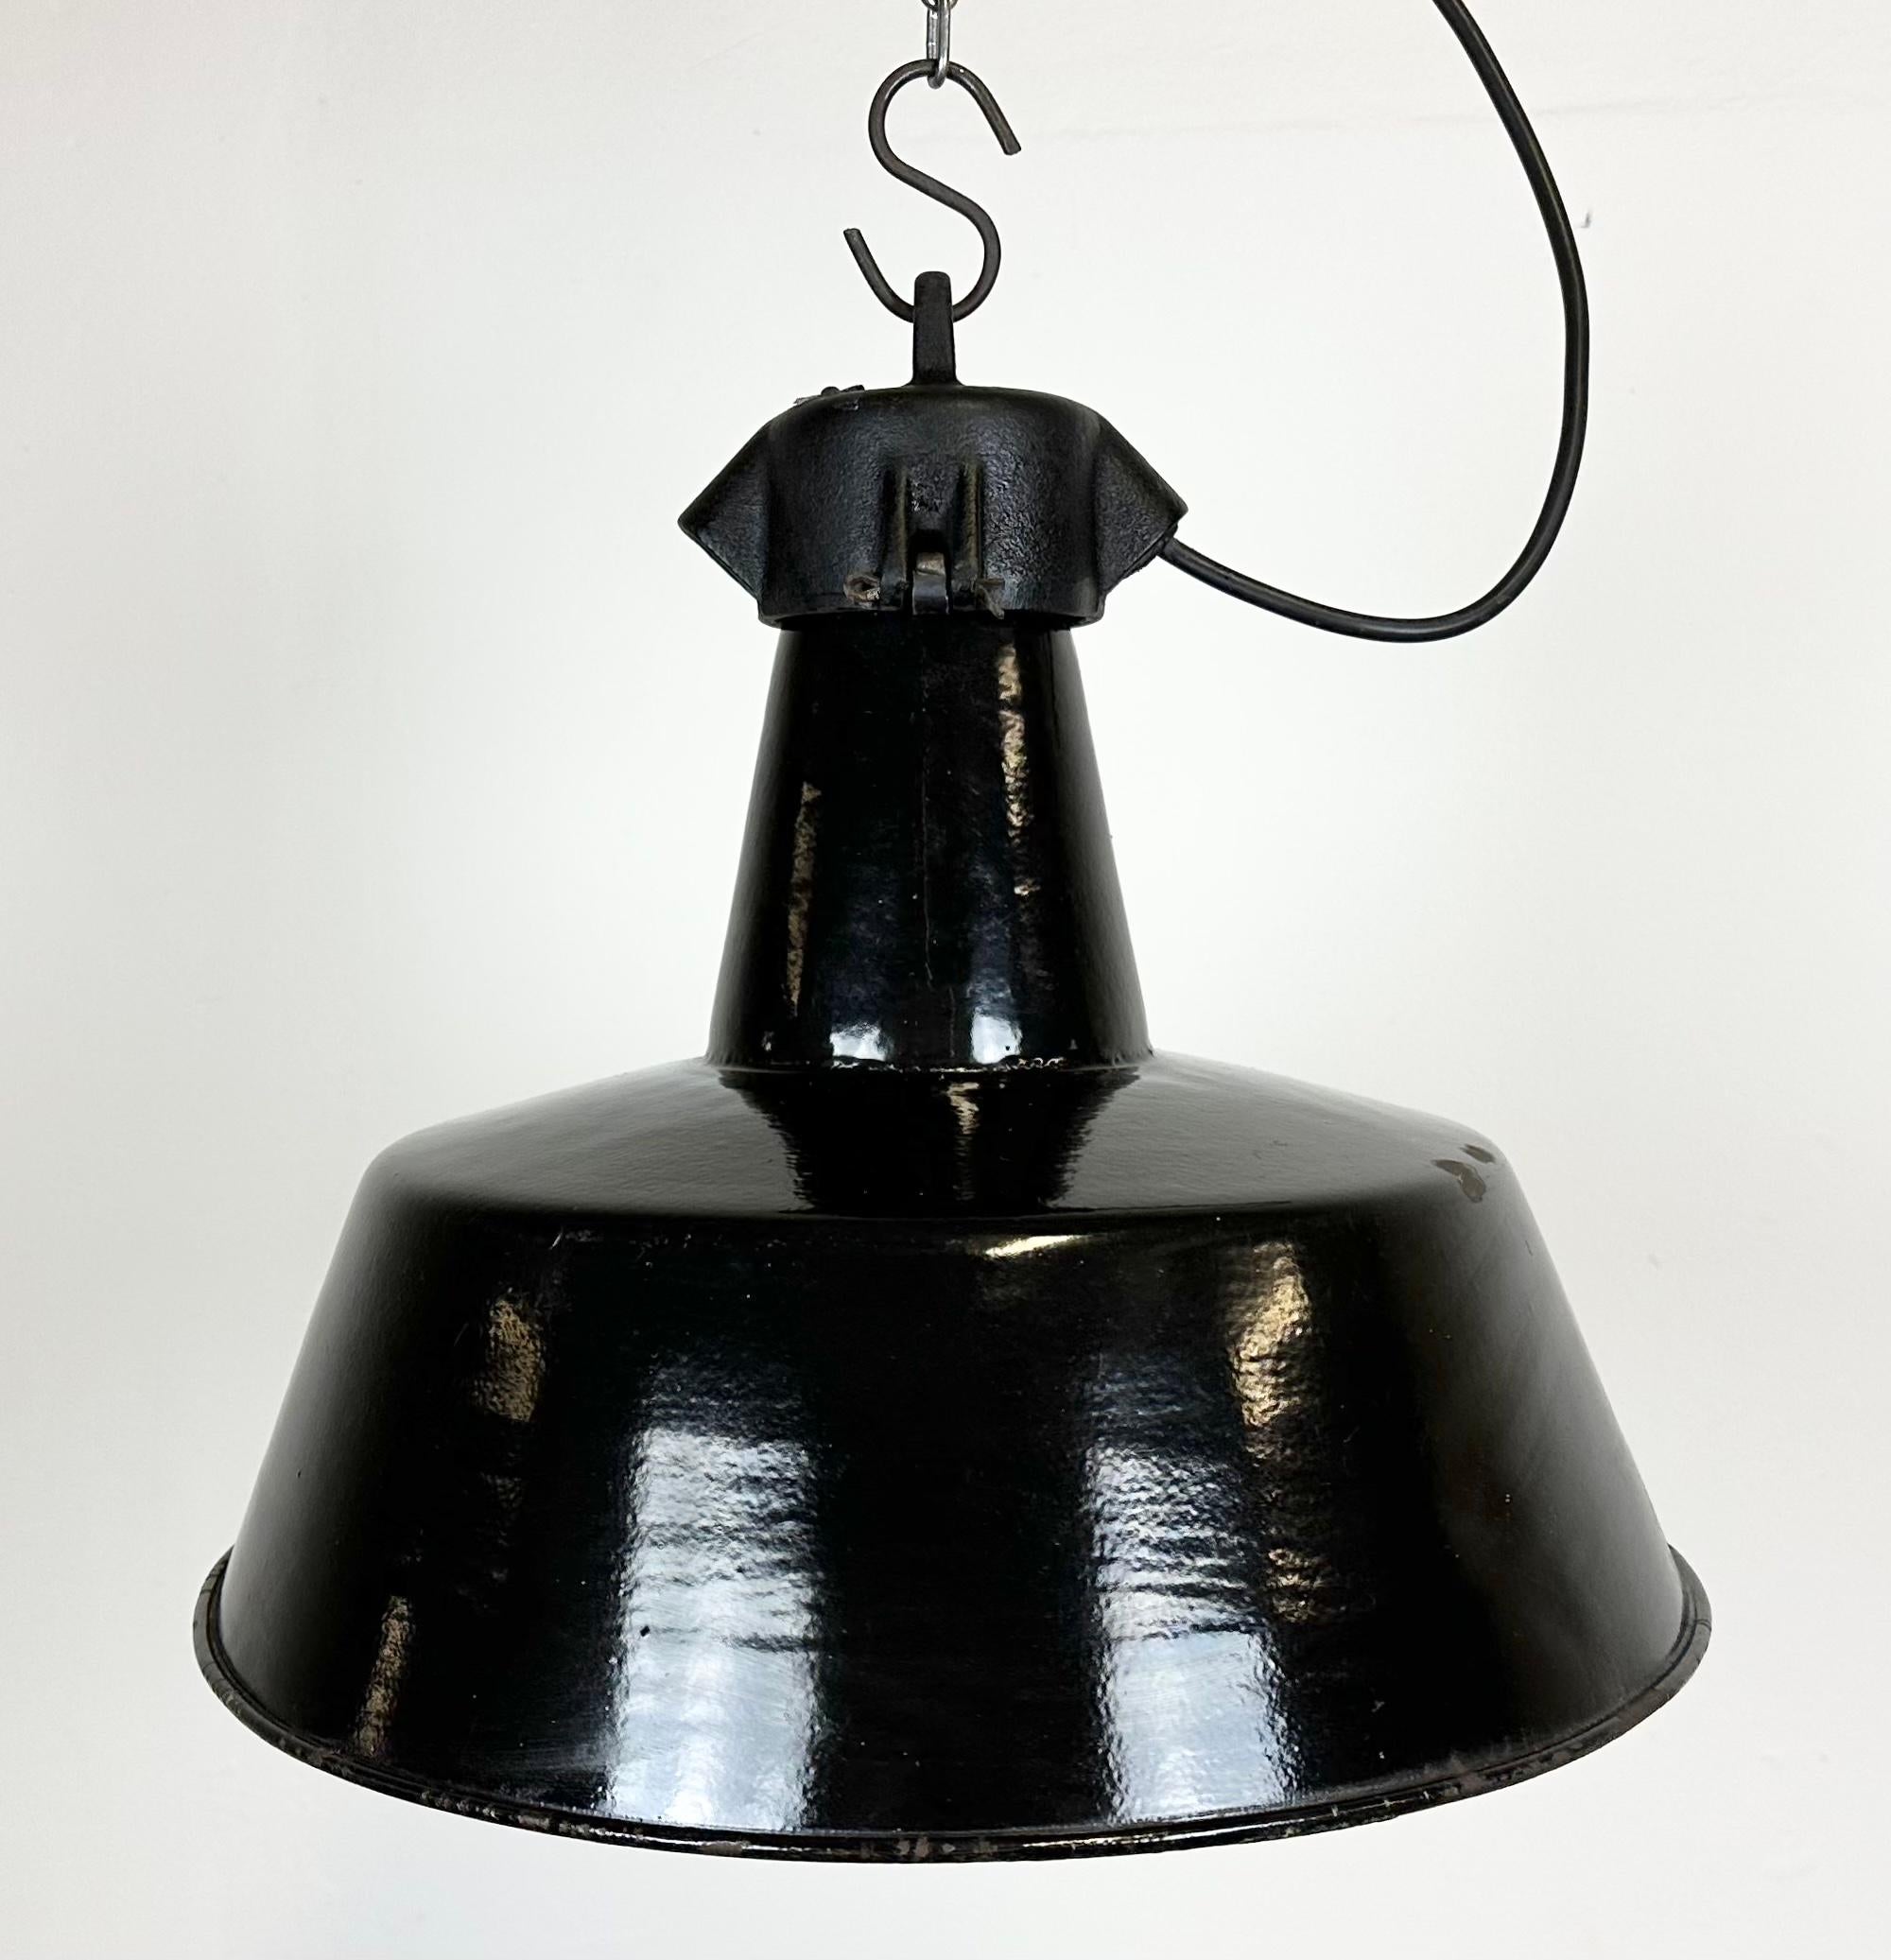 Czech Industrial Black Enamel Factory Lamp with Cast Iron Top, 1960s For Sale